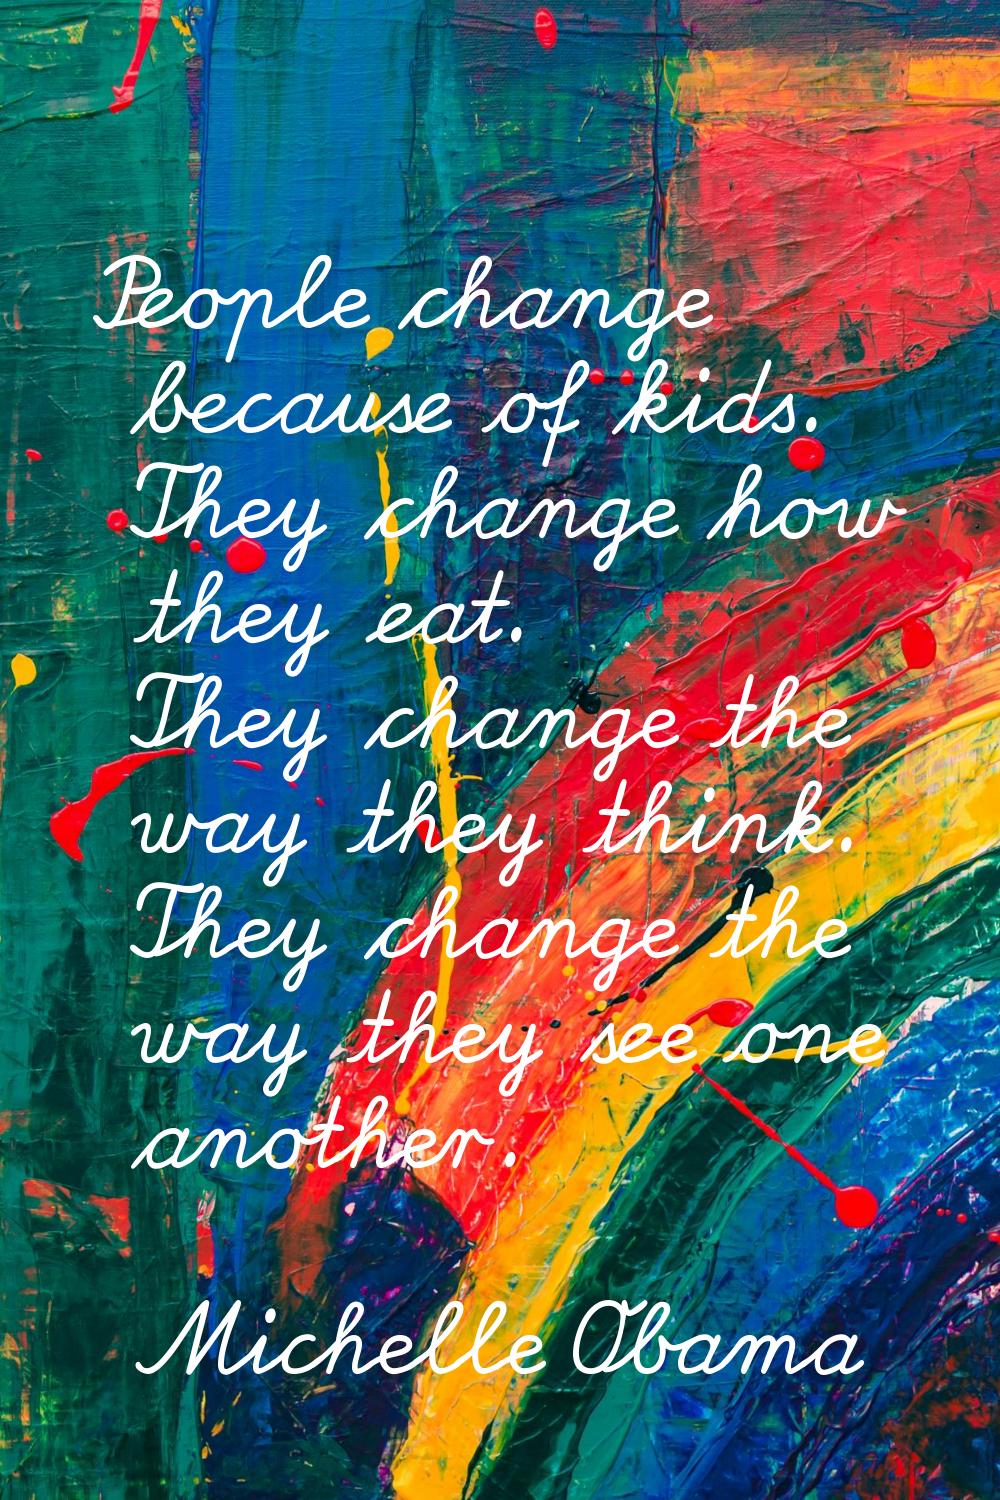 People change because of kids. They change how they eat. They change the way they think. They chang